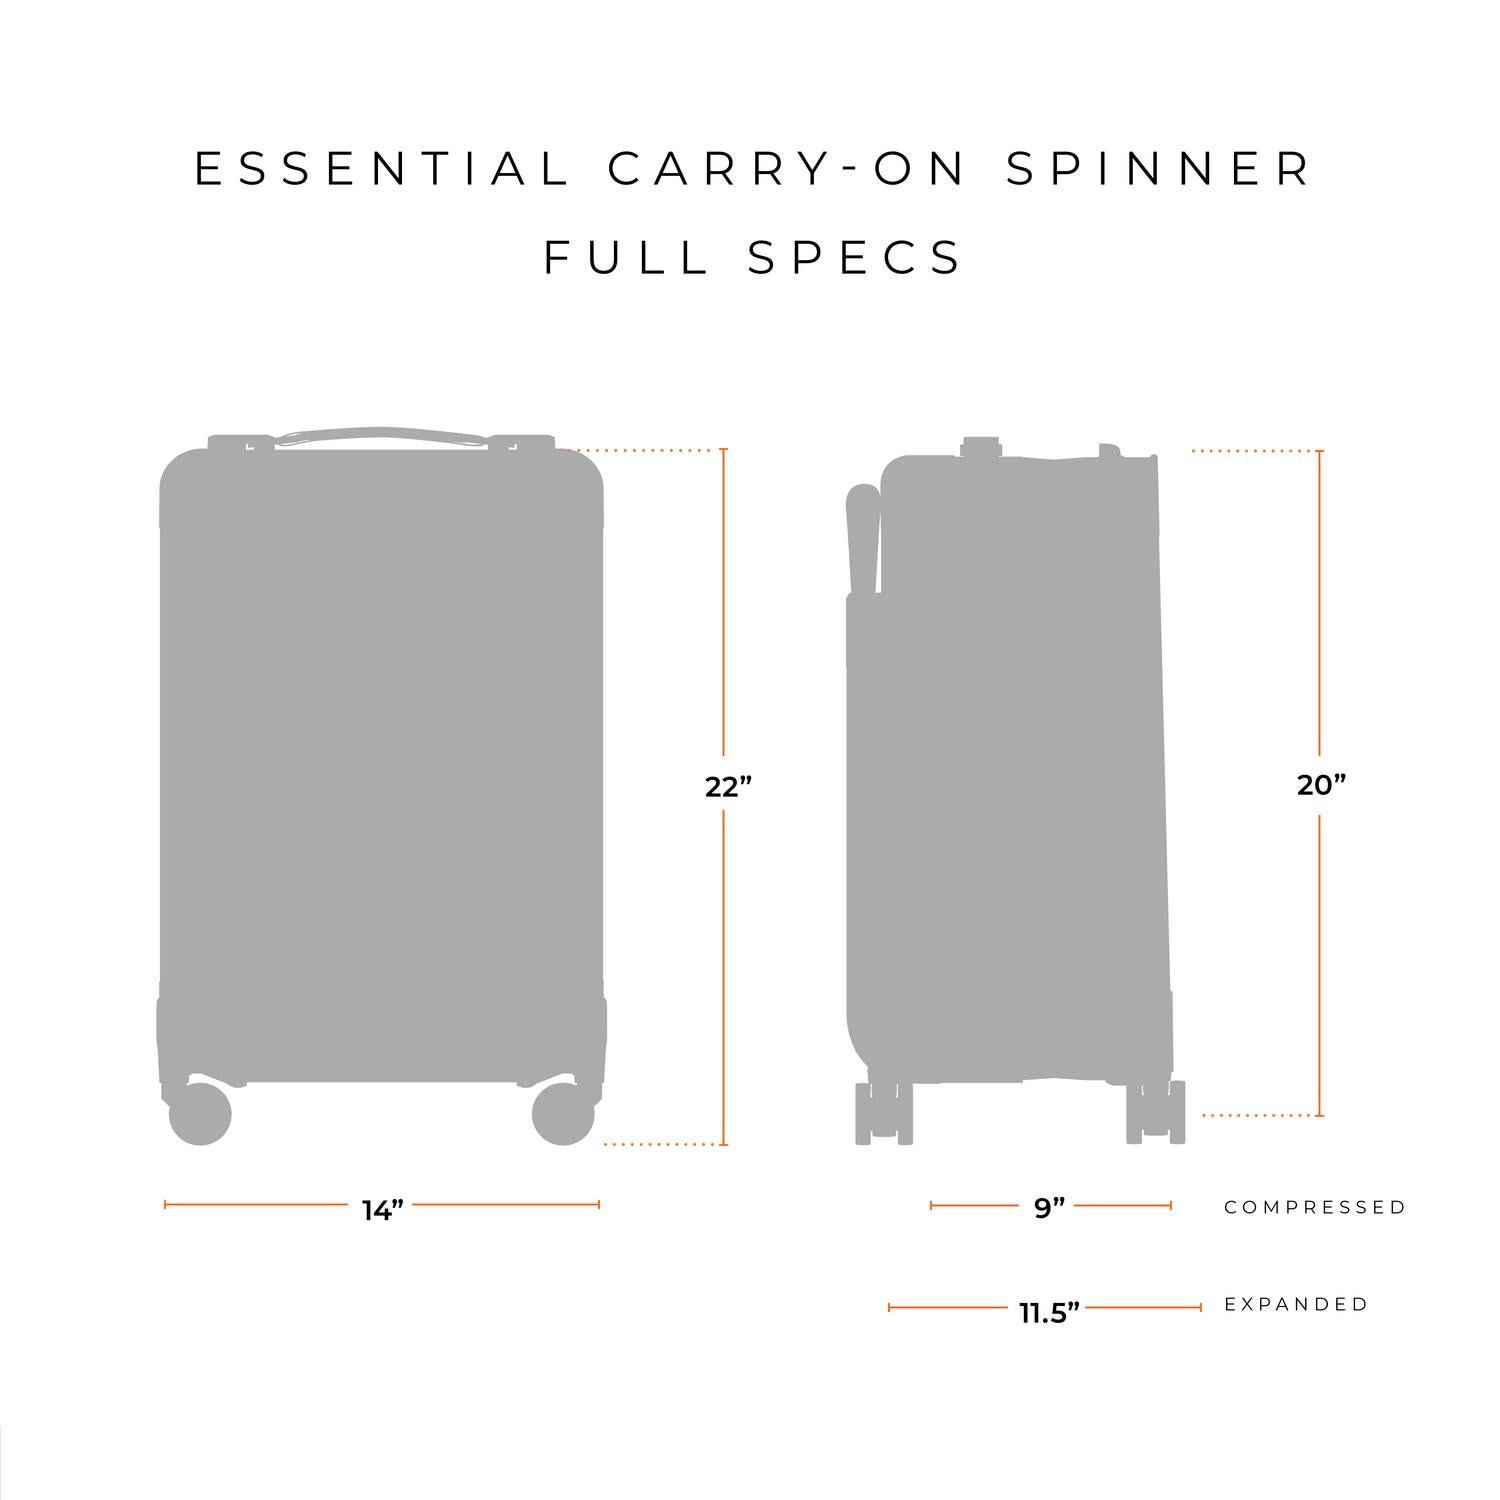 Briggs and Riley Essential Carry-On Spinner Full Specs 14"x22"x9" compressed or 11.5" expanded #color_olive